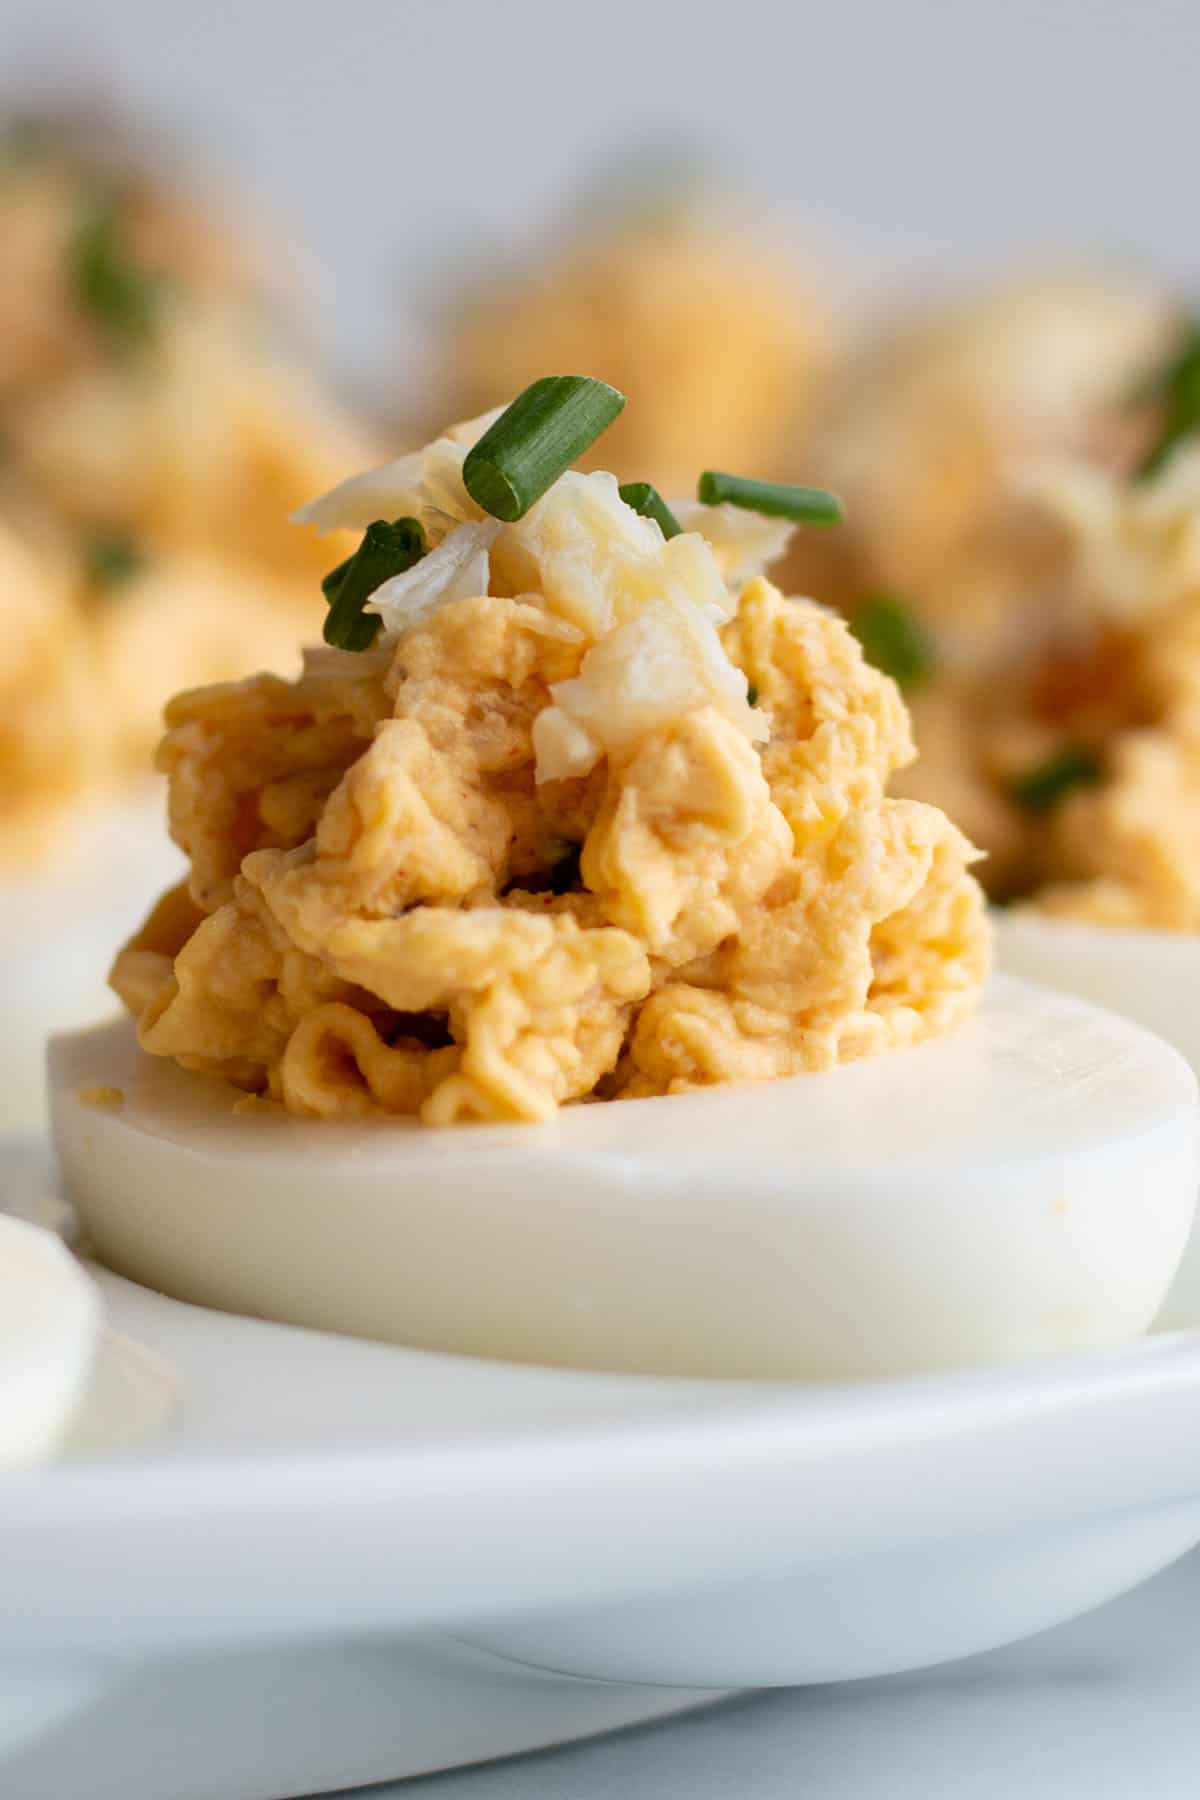 A deviled egg topped with fresh crab and chives.
